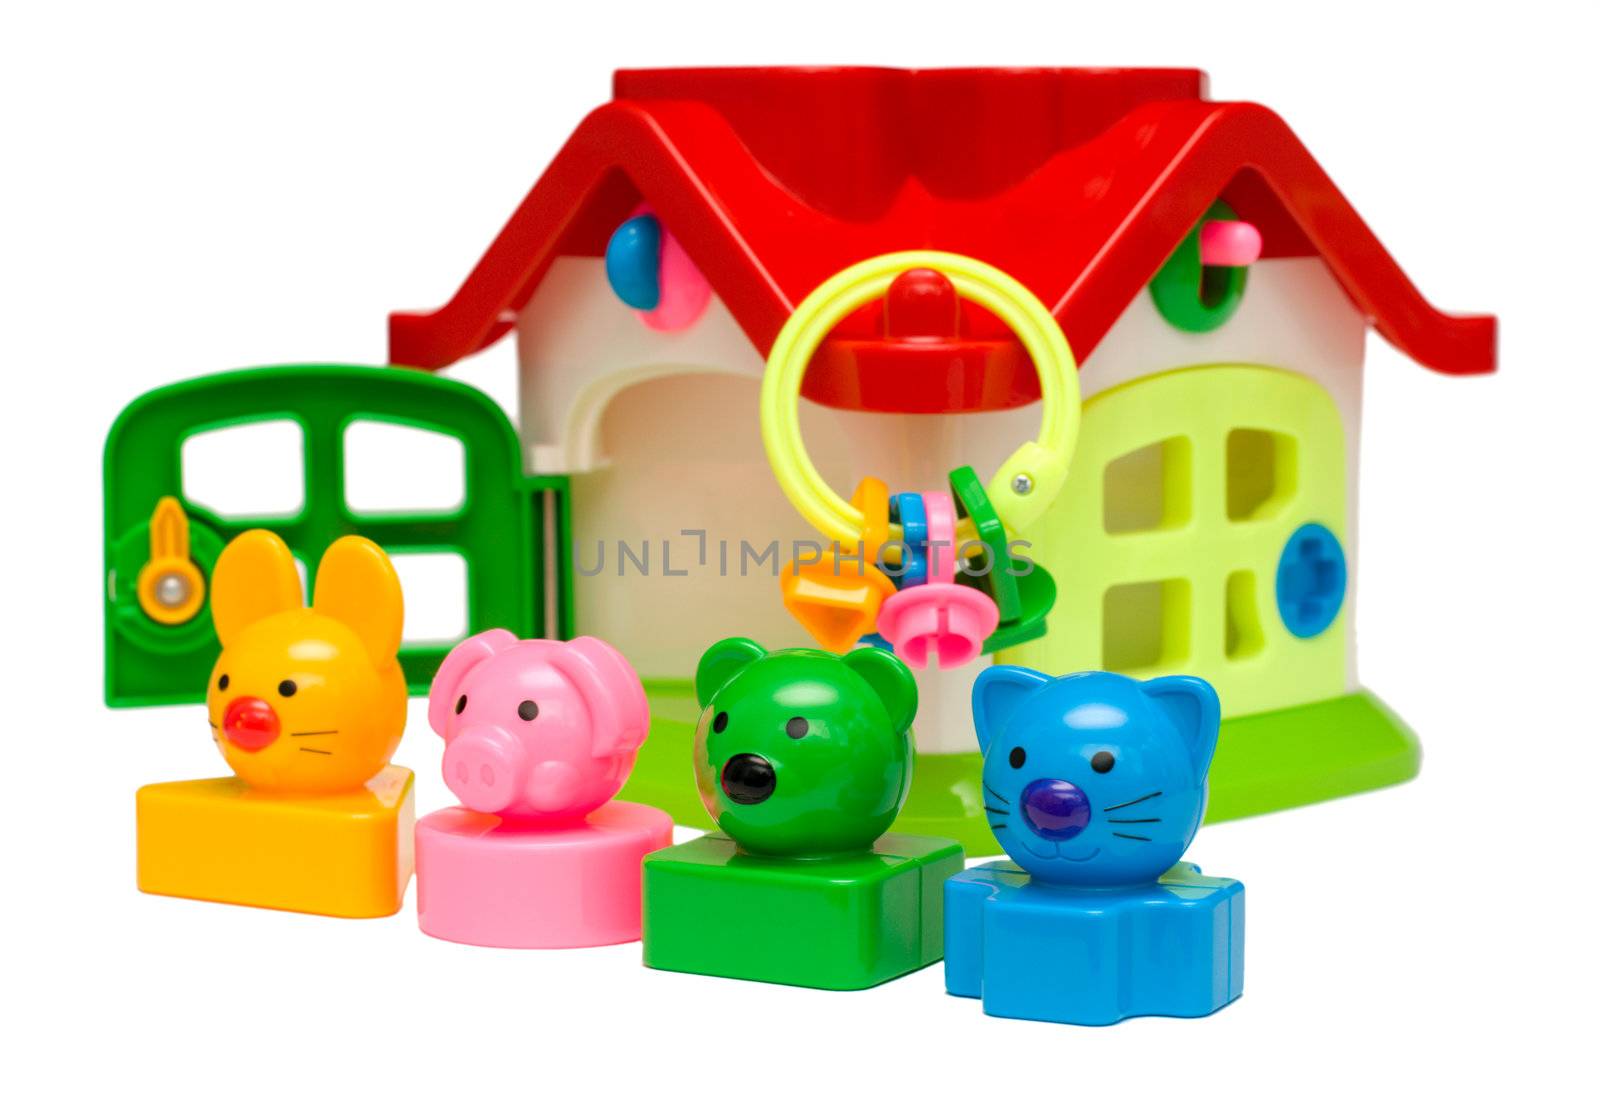 Toy house with keys by kzen